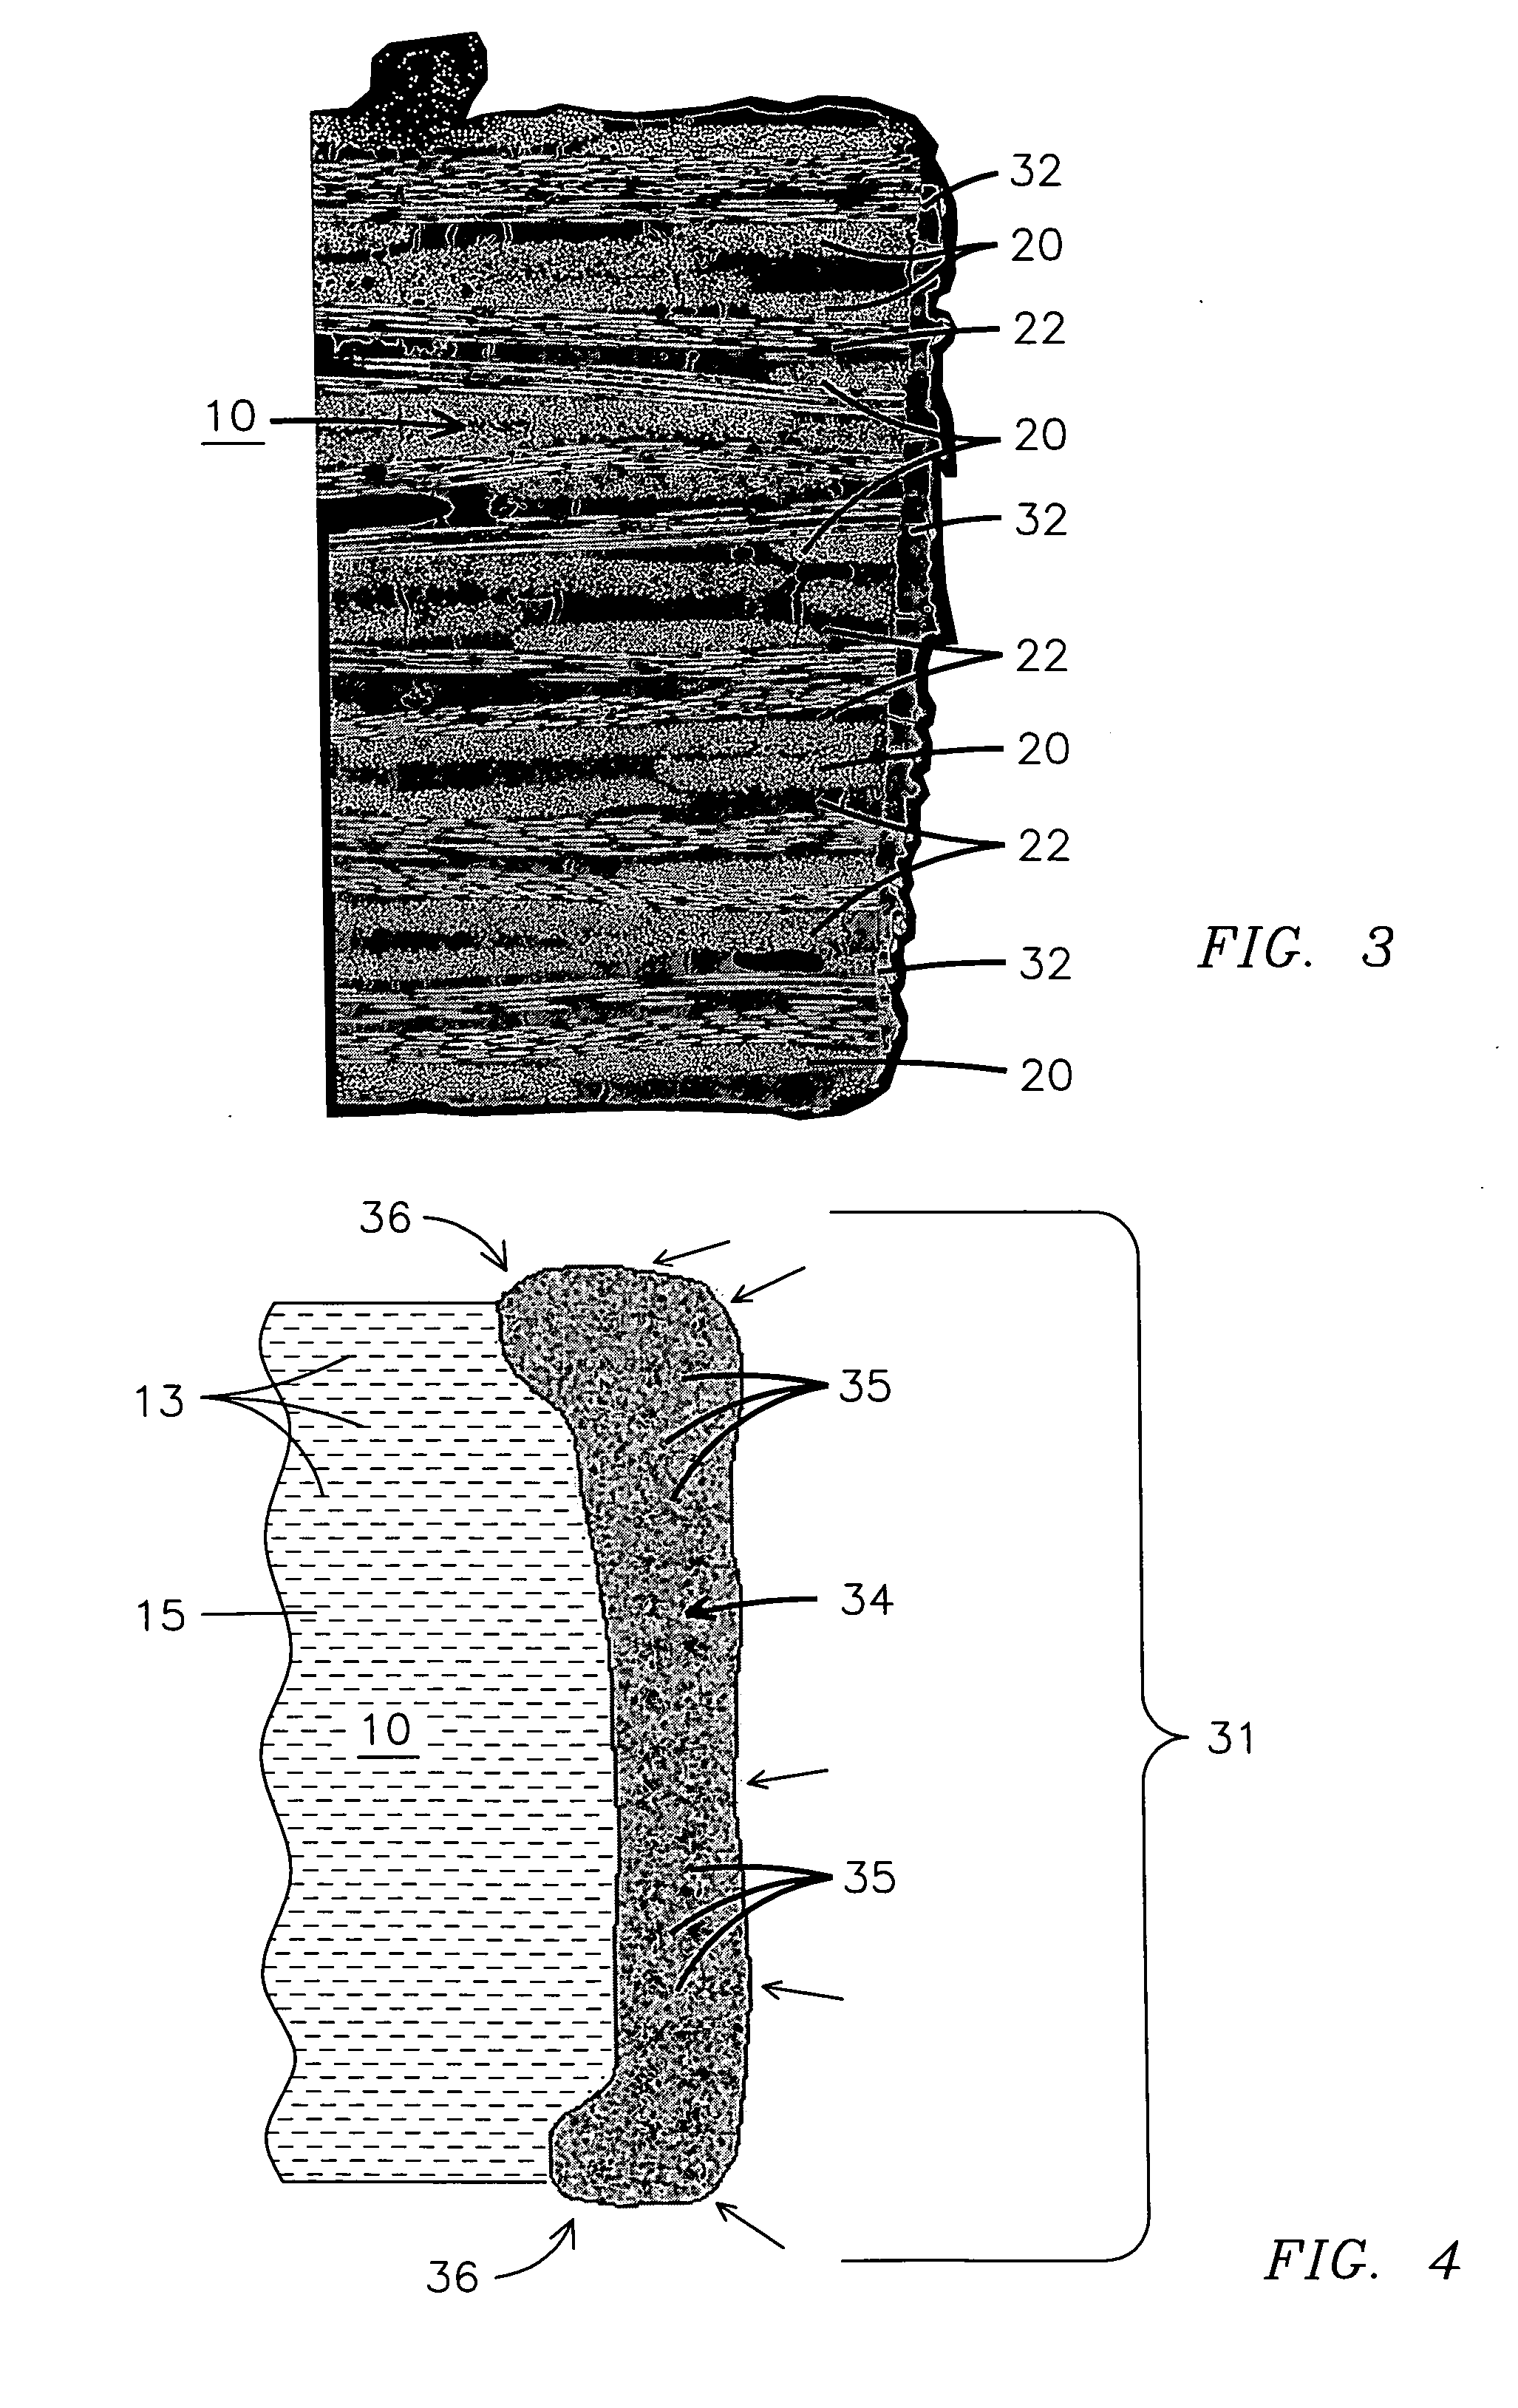 Method of sealing a free edge of a composite material